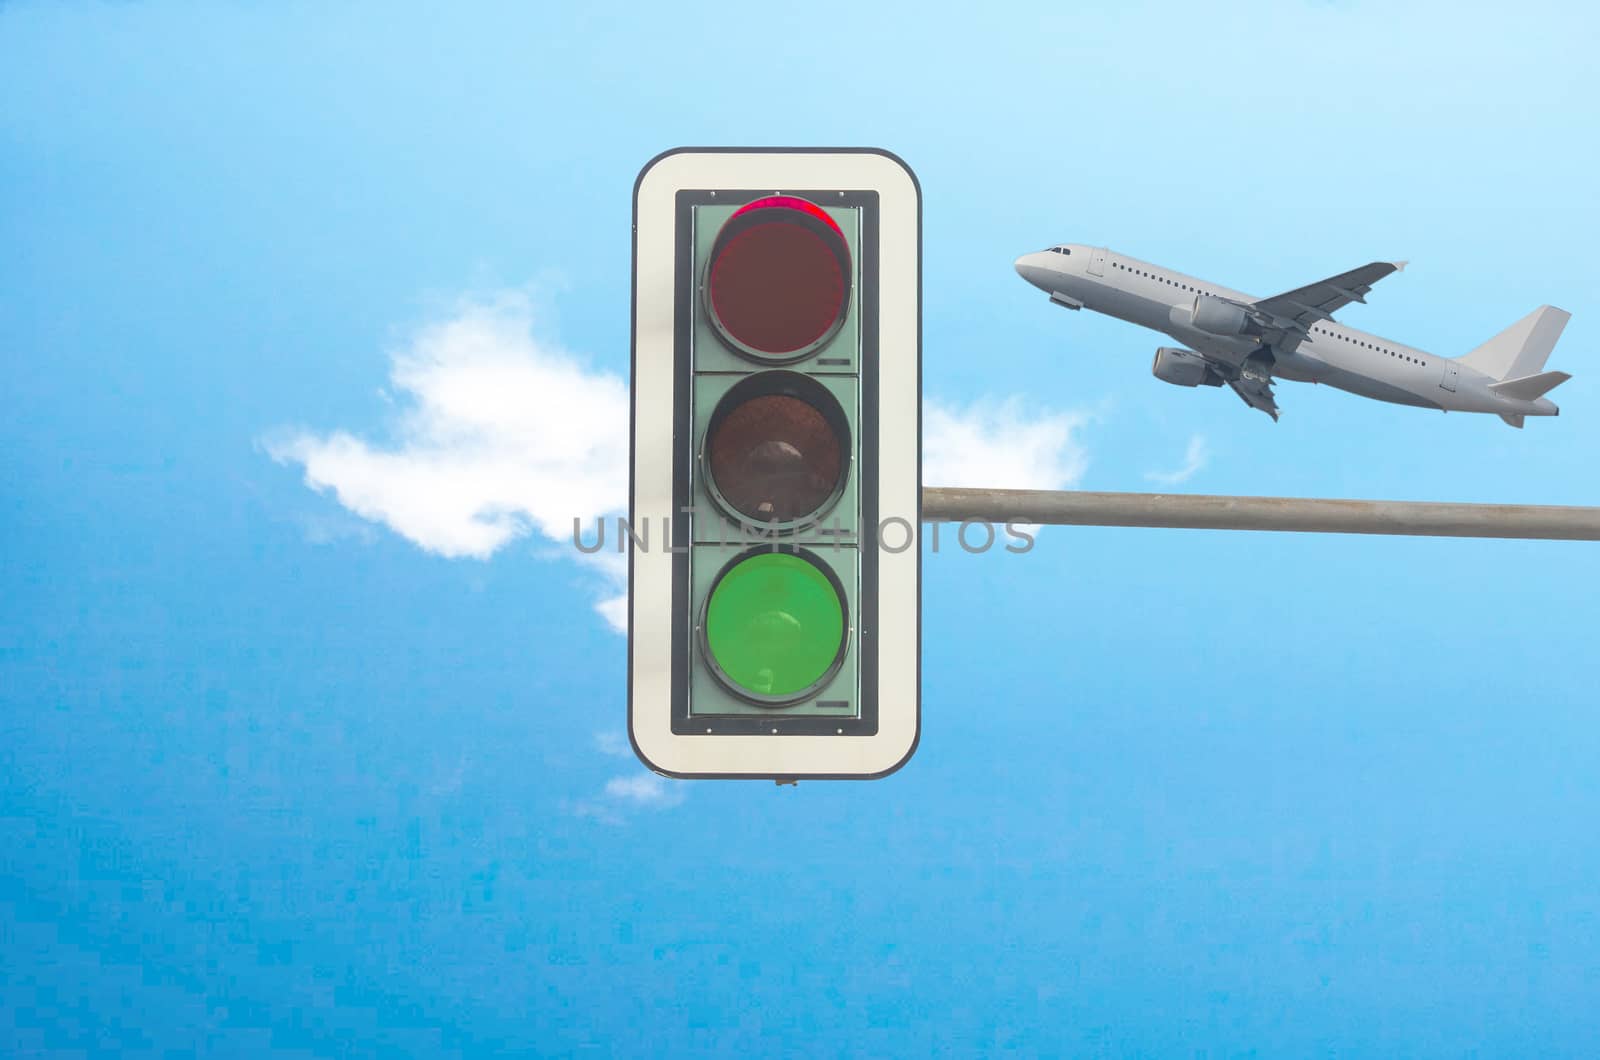  Green traffic light, airplane in background  by JFsPic